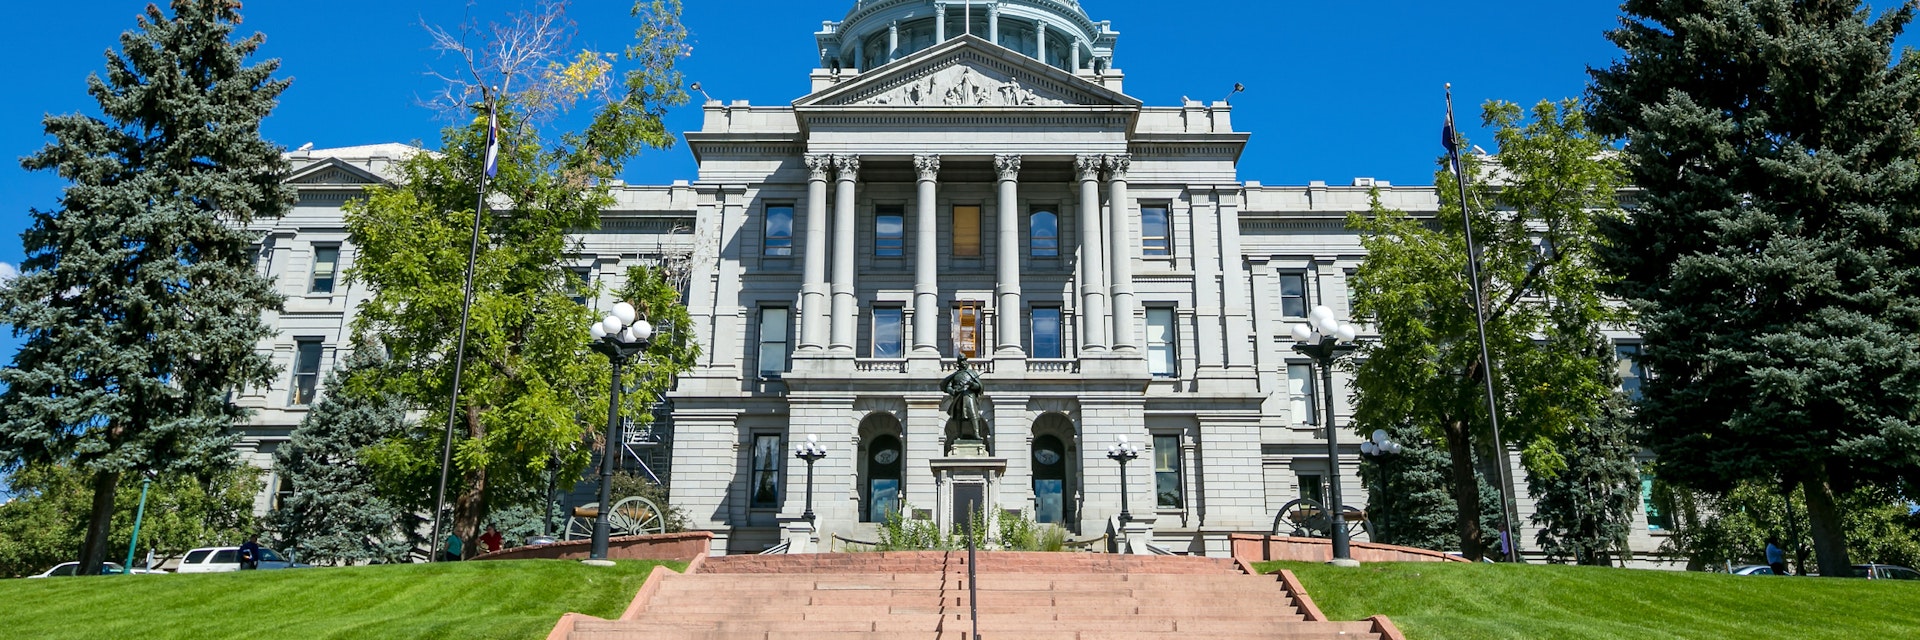 Colorado State Capitol Building in Denver; Shutterstock ID 216746869; Your name (First / Last): Emma Sparks; GL account no.: 65050; Netsuite department name: Online Editorial; Full Product or Project name including edition: Best_in_the_US_POIs